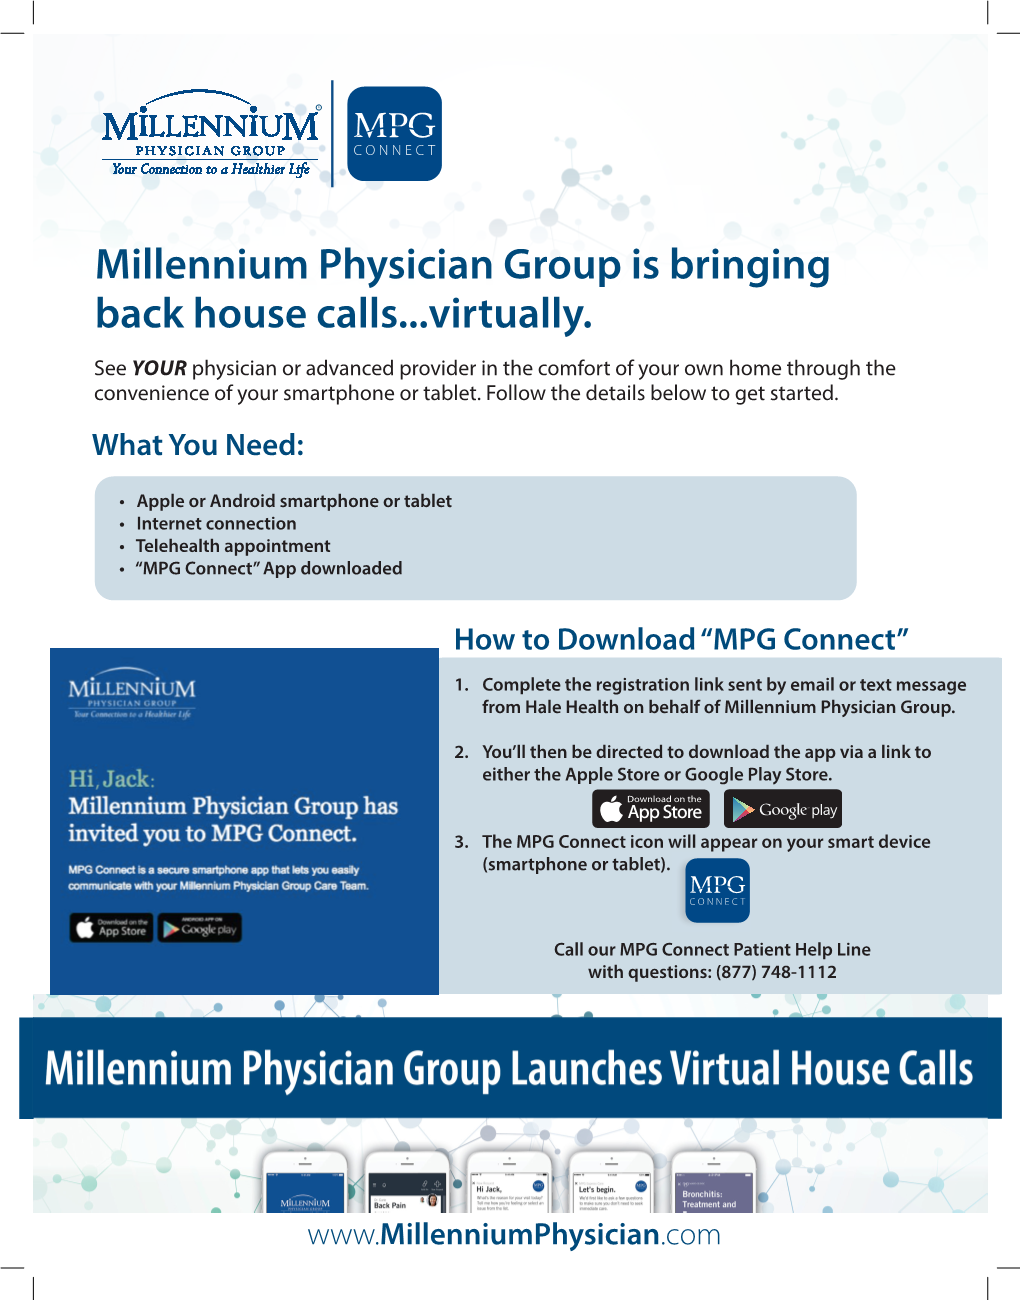 Millennium Physician Group Is Bringing Back House Calls...Virtually